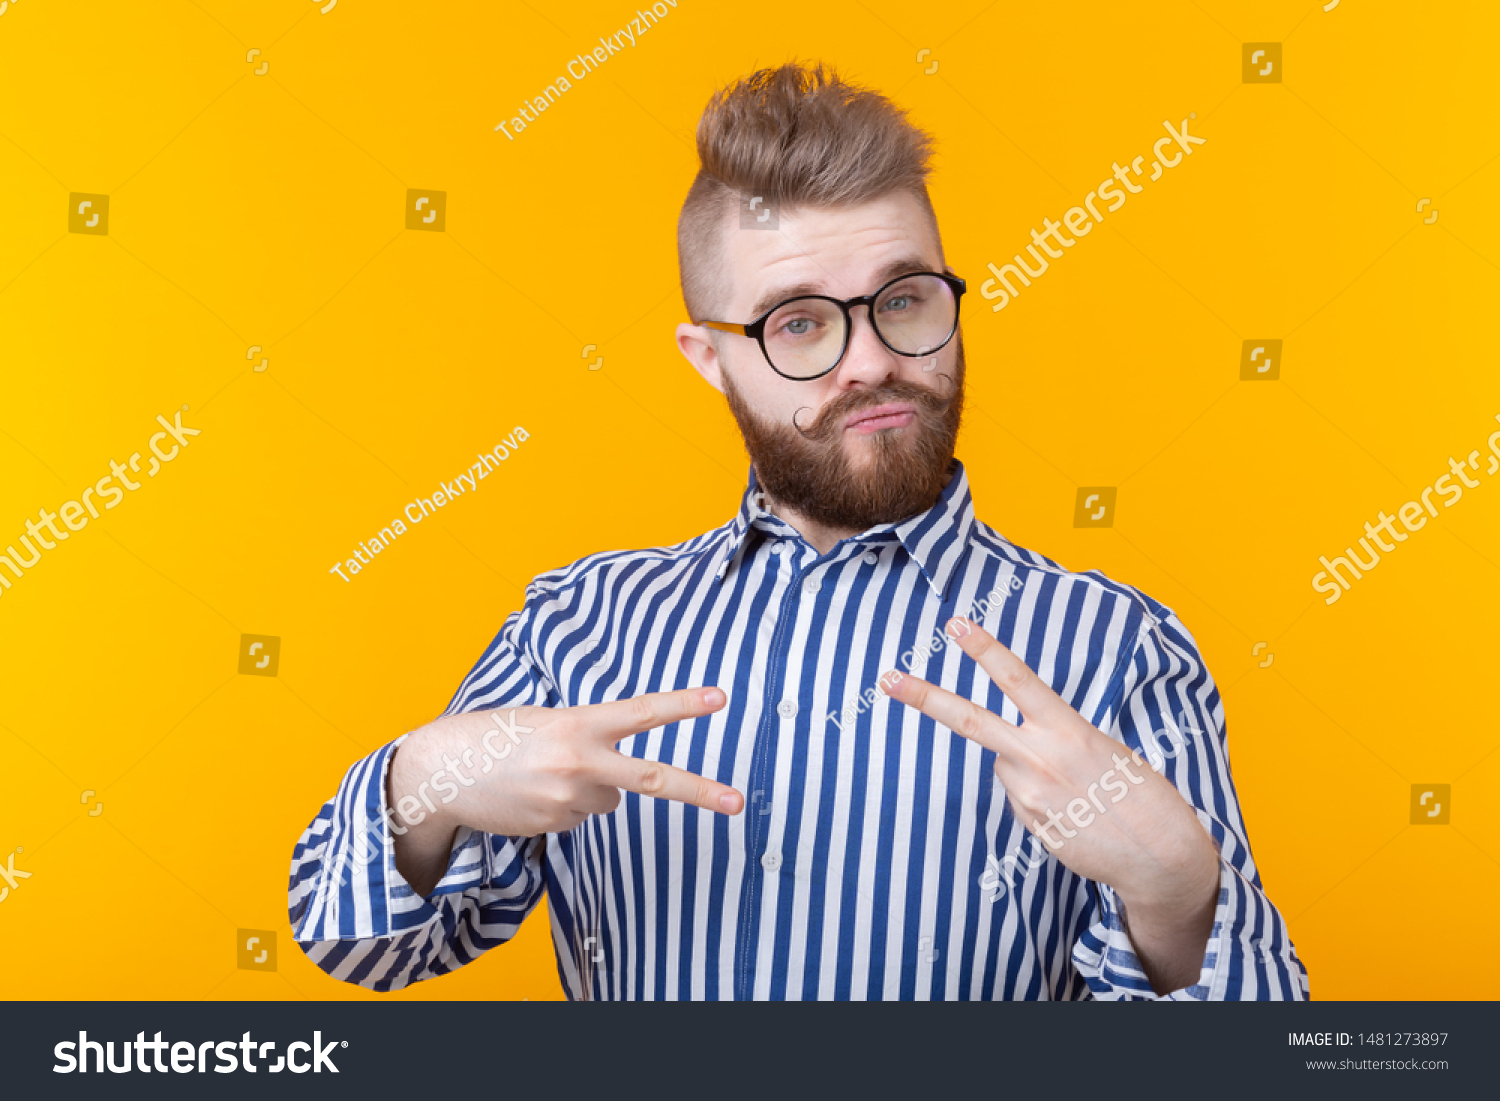 Charming confident young fashion hipster man with glasses and a beard shows victory gesture posing over a yellow background. The concept of self-confidence and funny. #1481273897